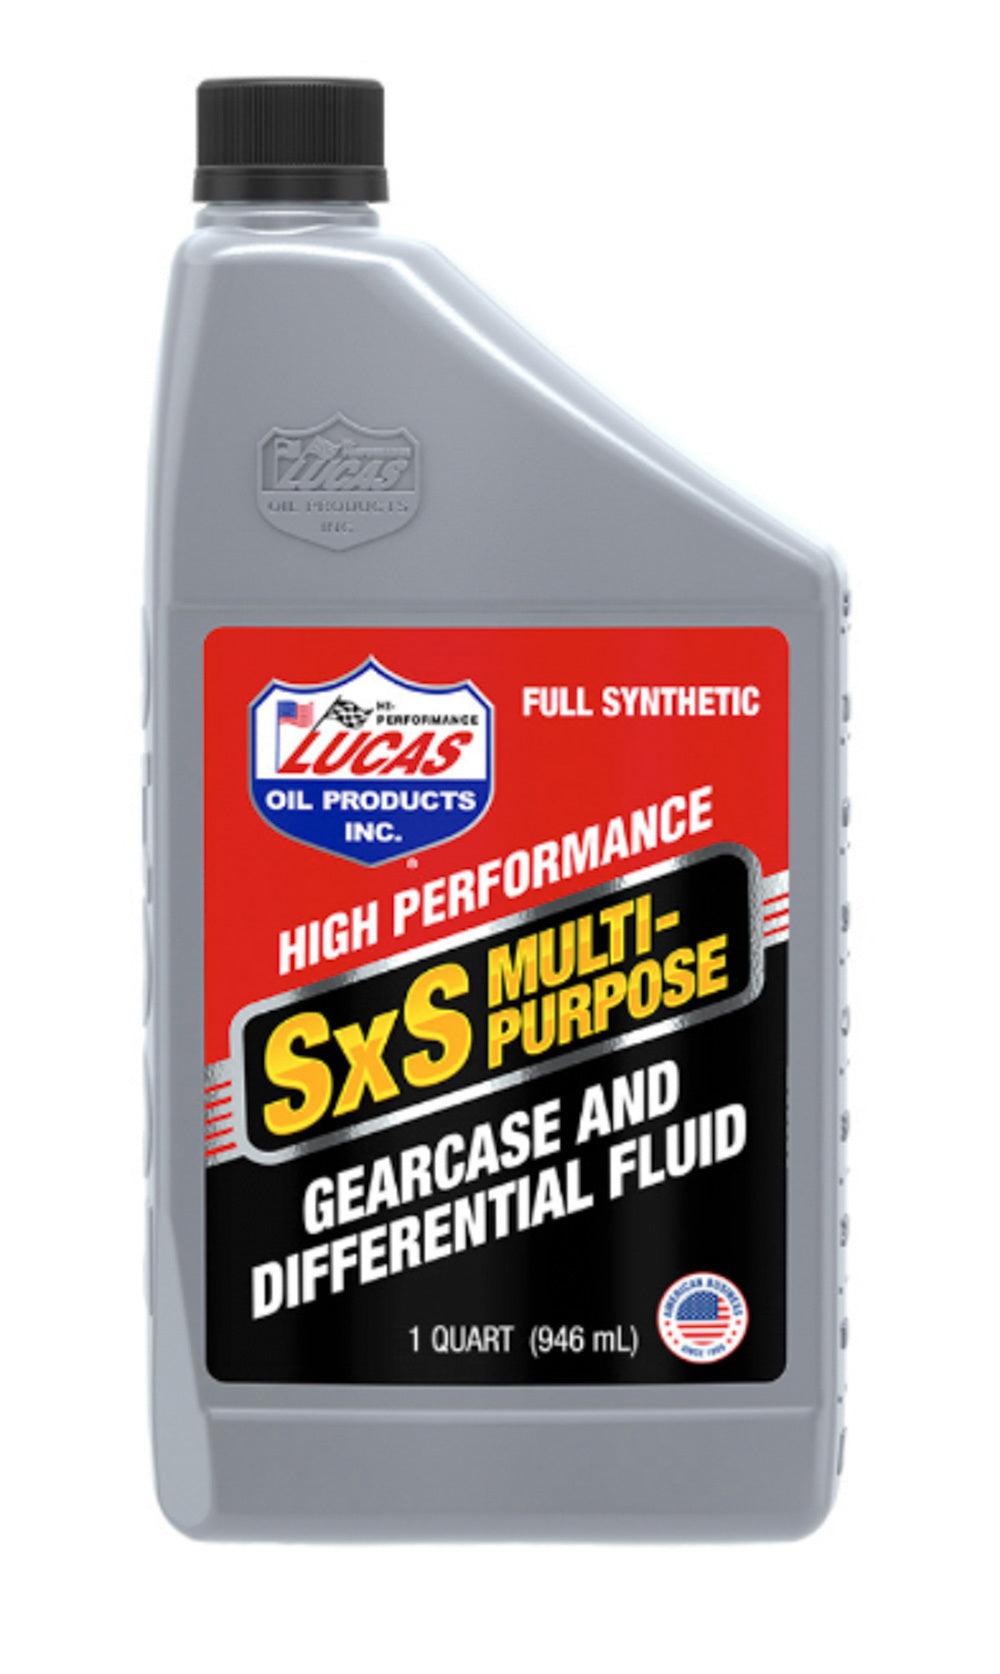 Synthetic Gearcase & Dif ferential Oil 1 Quart - Burlile Performance Products